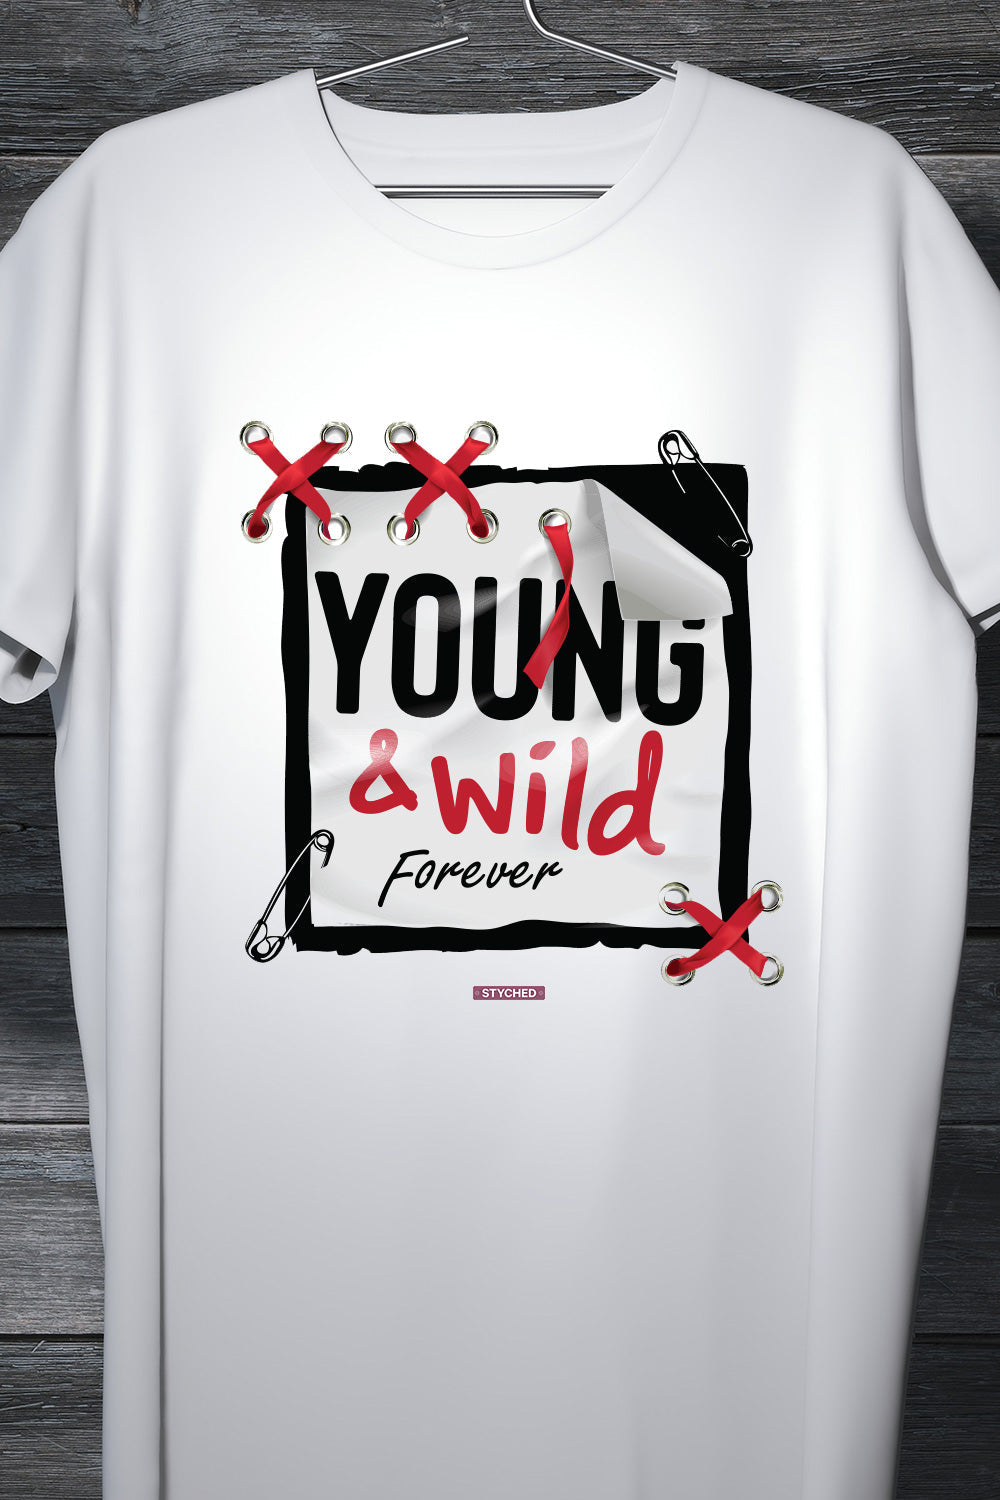 Paytm Exclusive - Young and Wild forever - Graphic printed white casual fashion tshirt